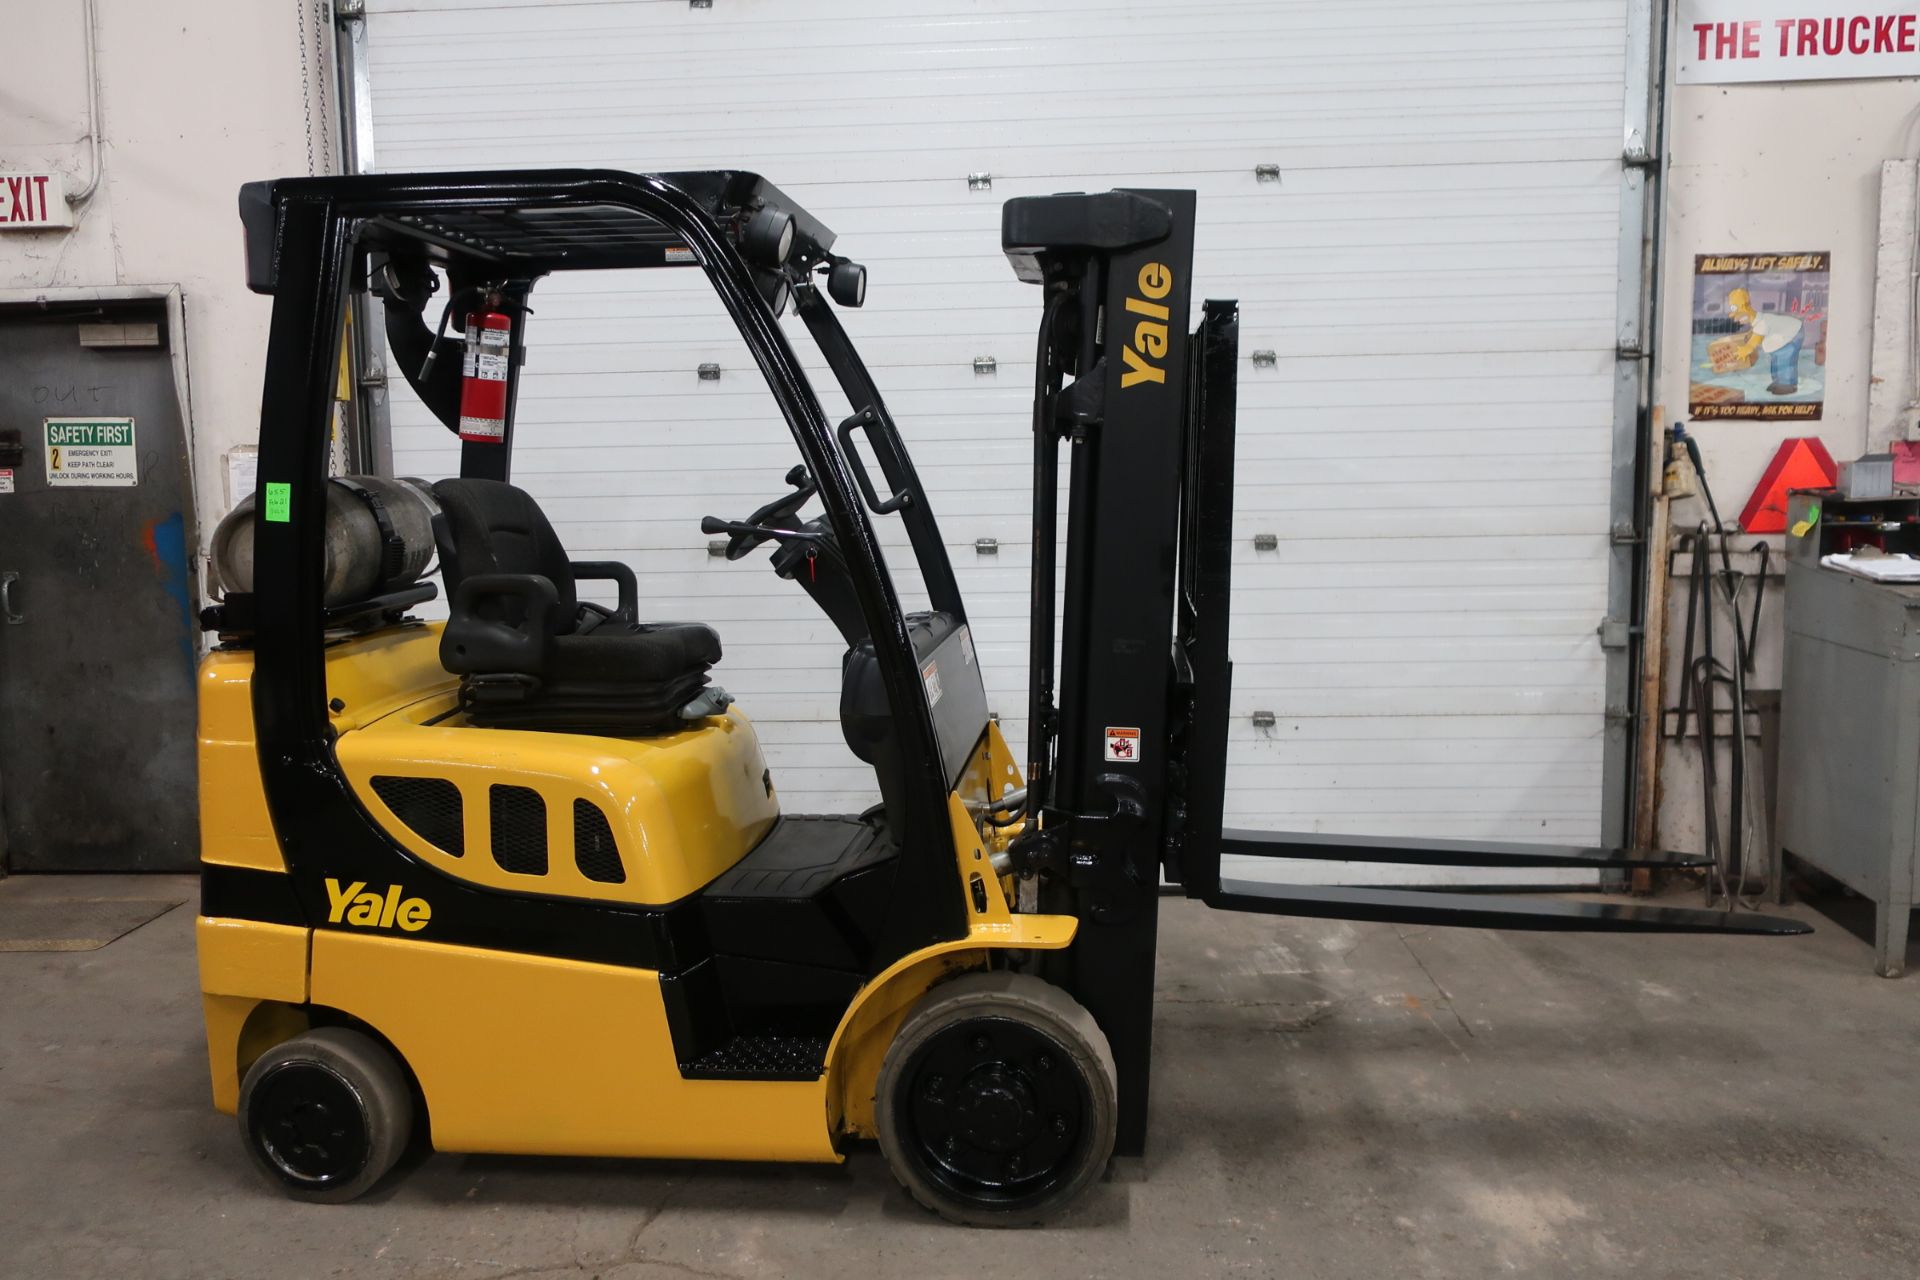 FREE CUSTOMS - 2012 Yale 5000lbs Capacity Forklift with 3-stage mast - LPG (propane) with